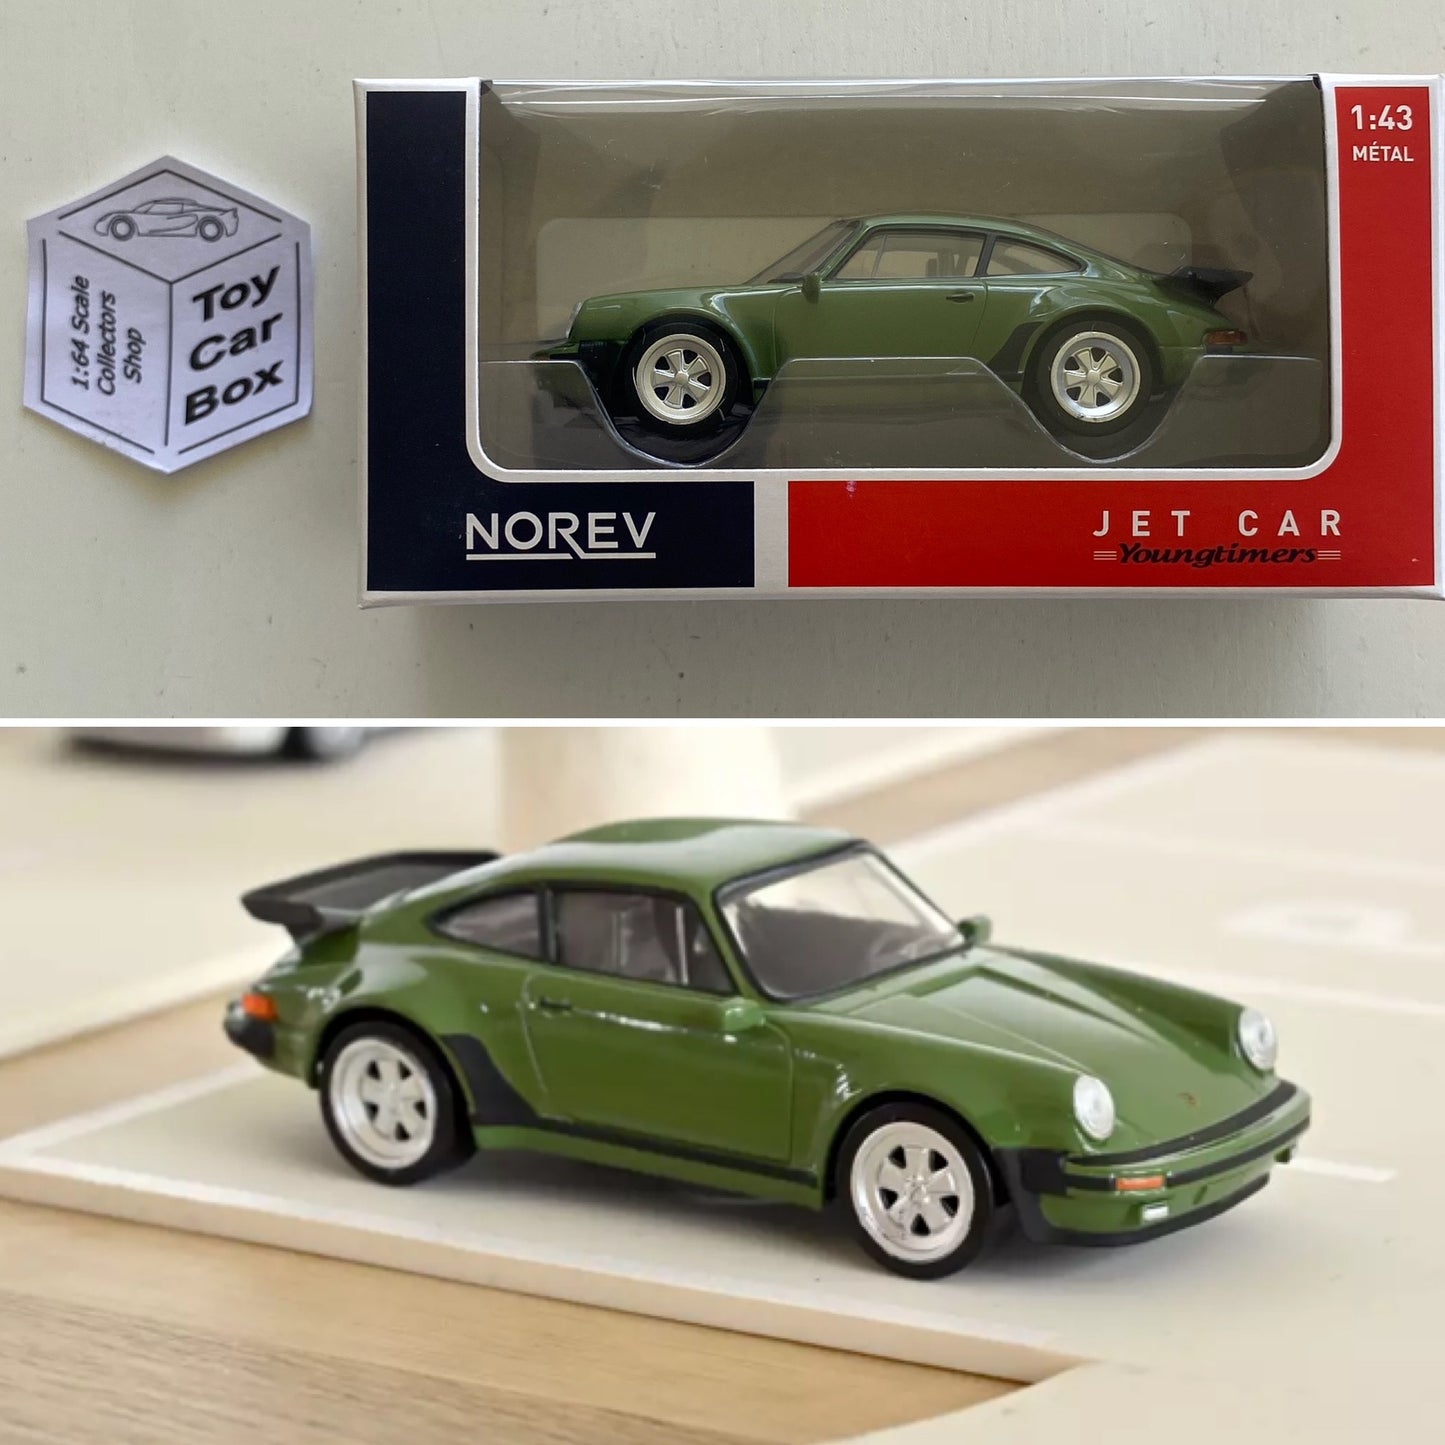 NOREV 1:43 Scale* - 1978 Porsche 911 Turbo (Olive Green - Boxed Jet Car) M38g